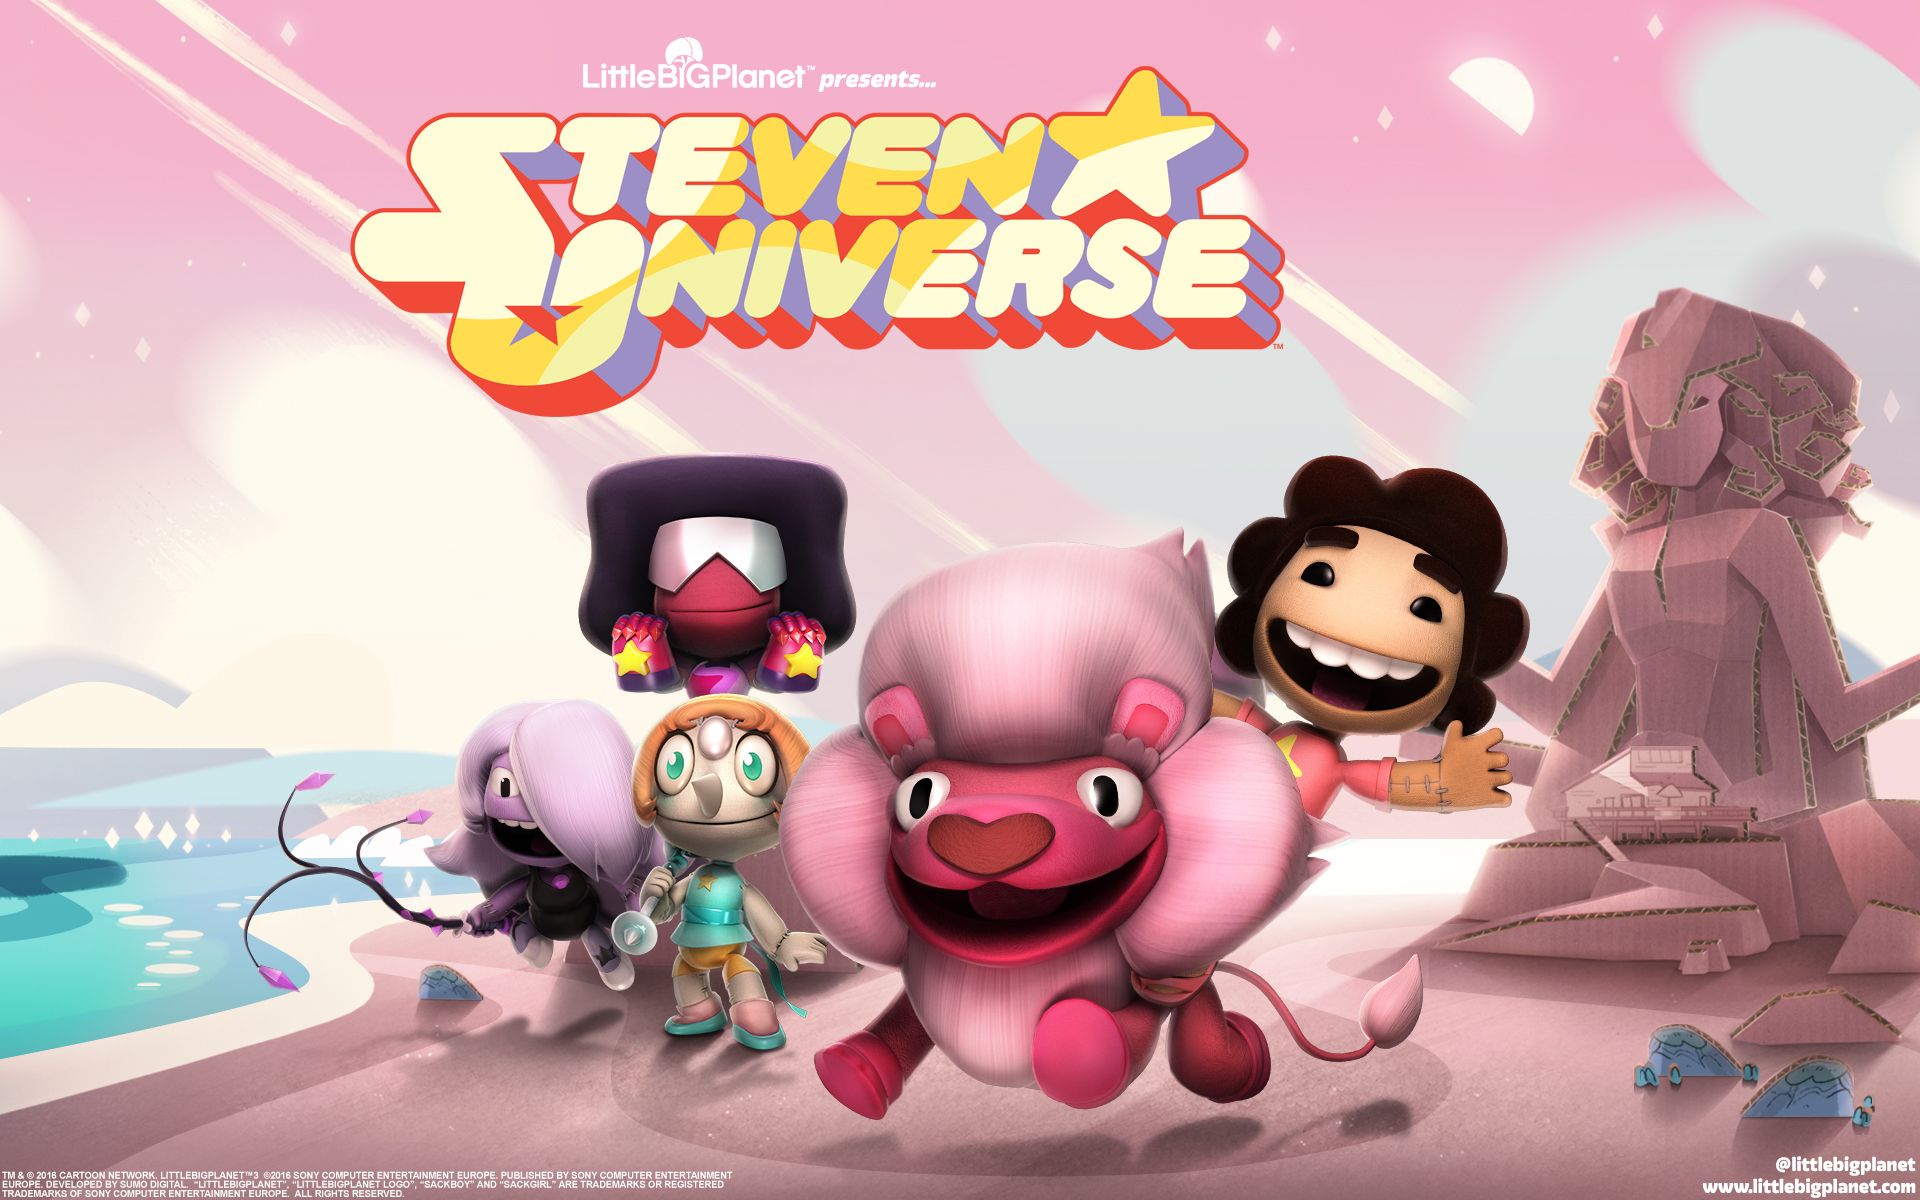 Steven Universe Costume Pack out now!